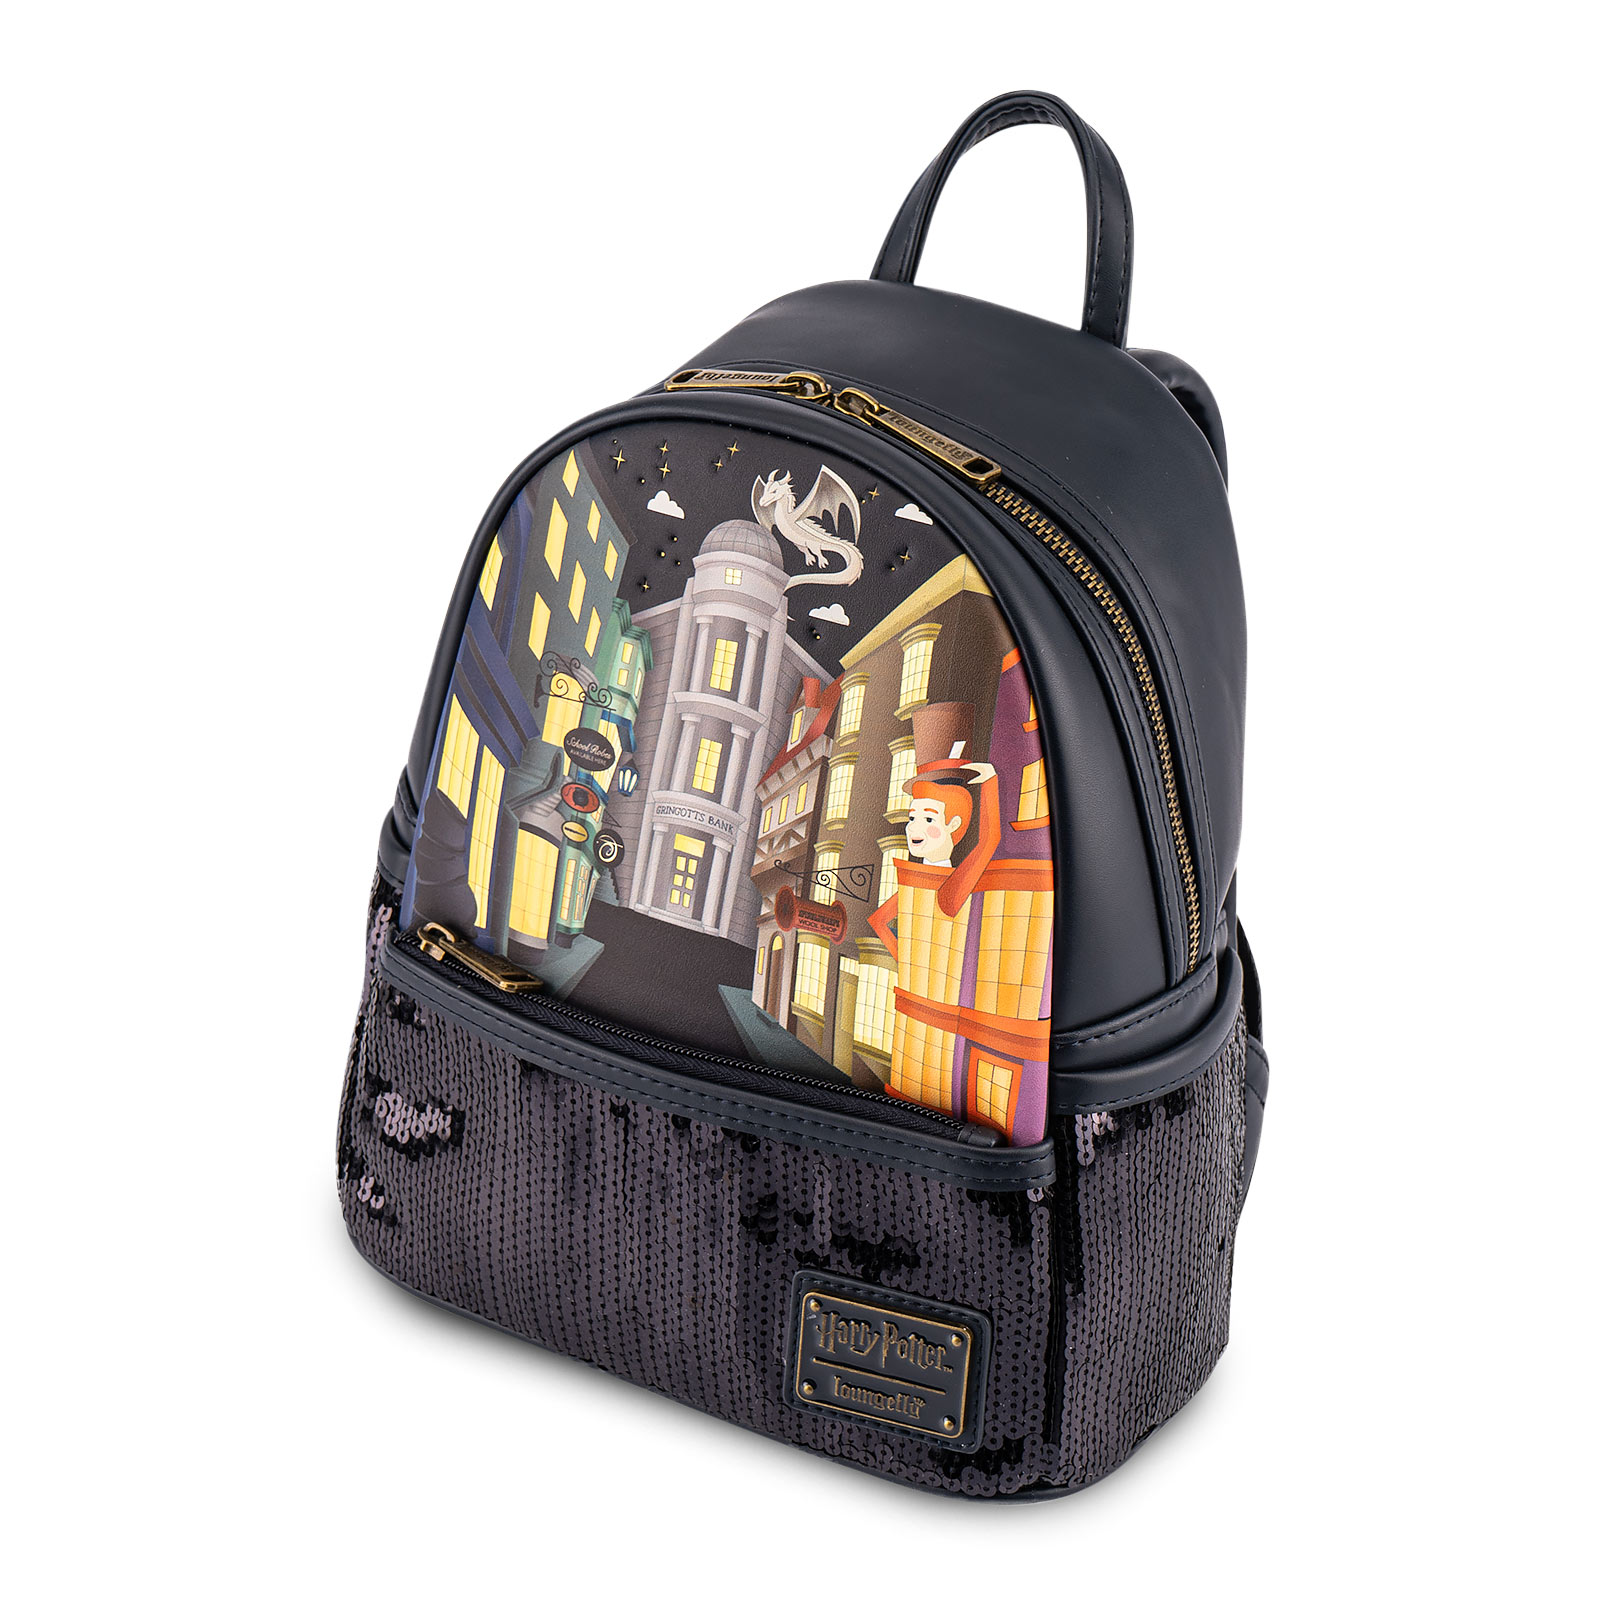 Harry Potter - Diagon Alley Mini Backpack